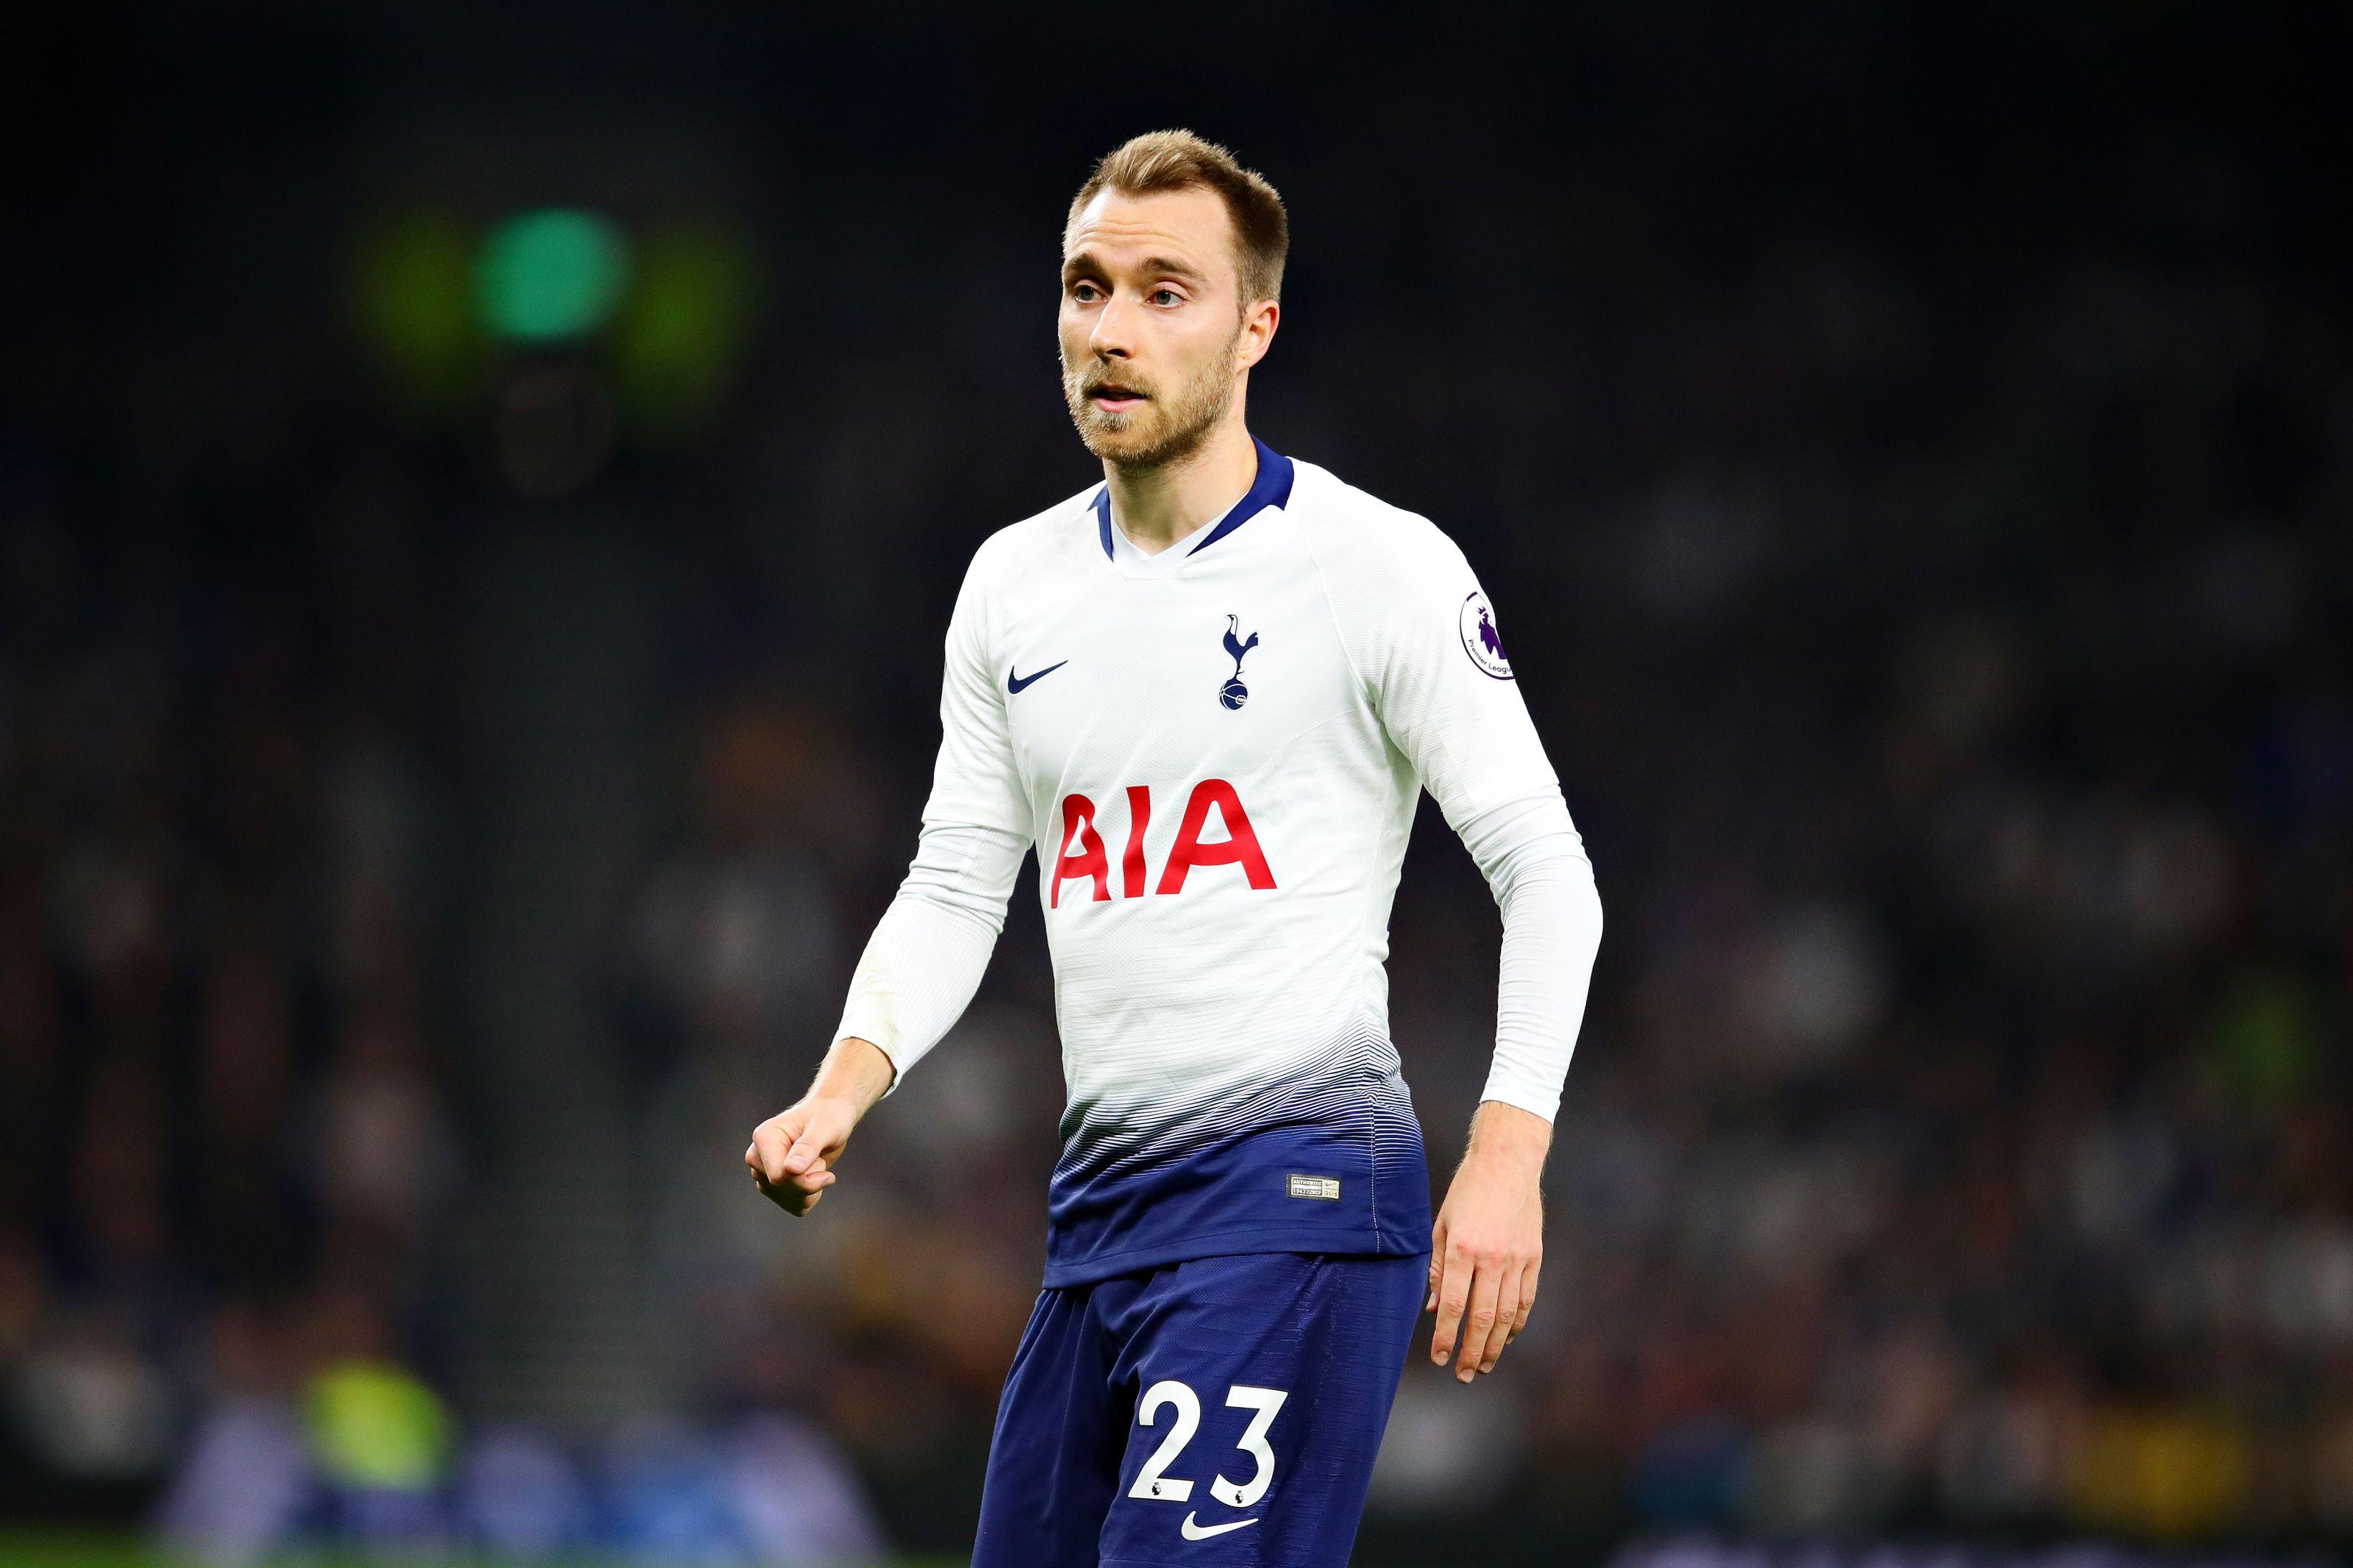 Tottenham are actively evaluating potential Eriksen replacements